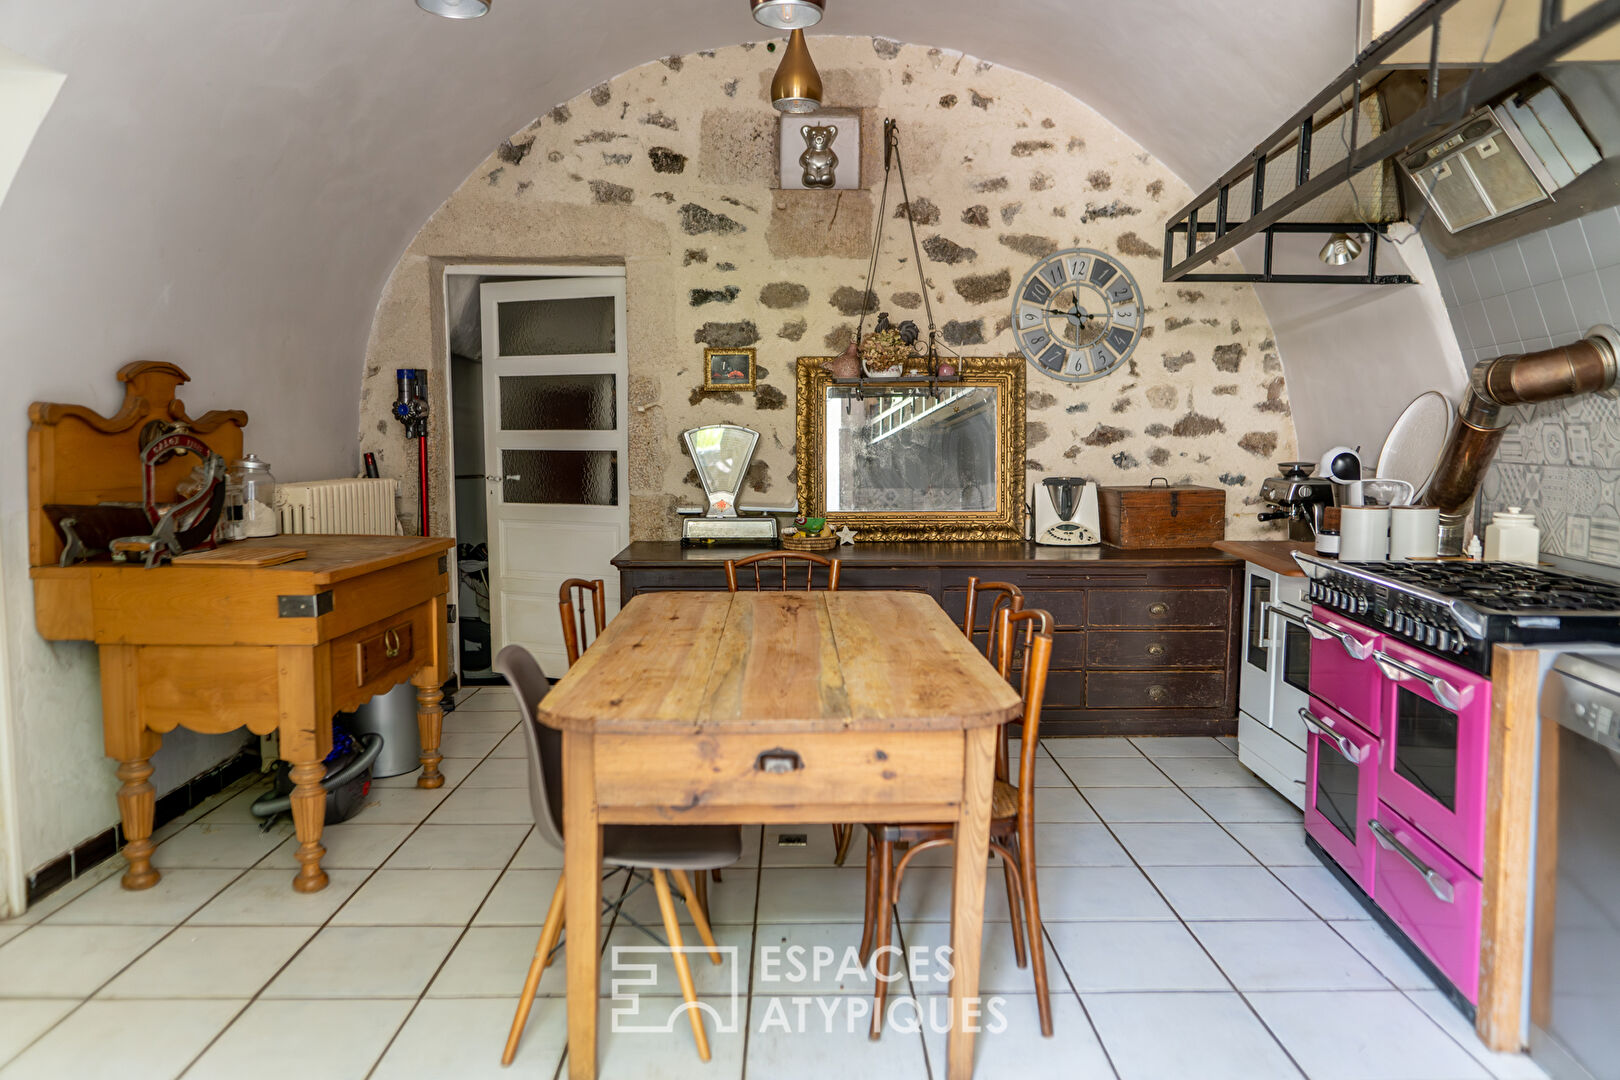 This property in the Haute Loire is waiting to inspire you.